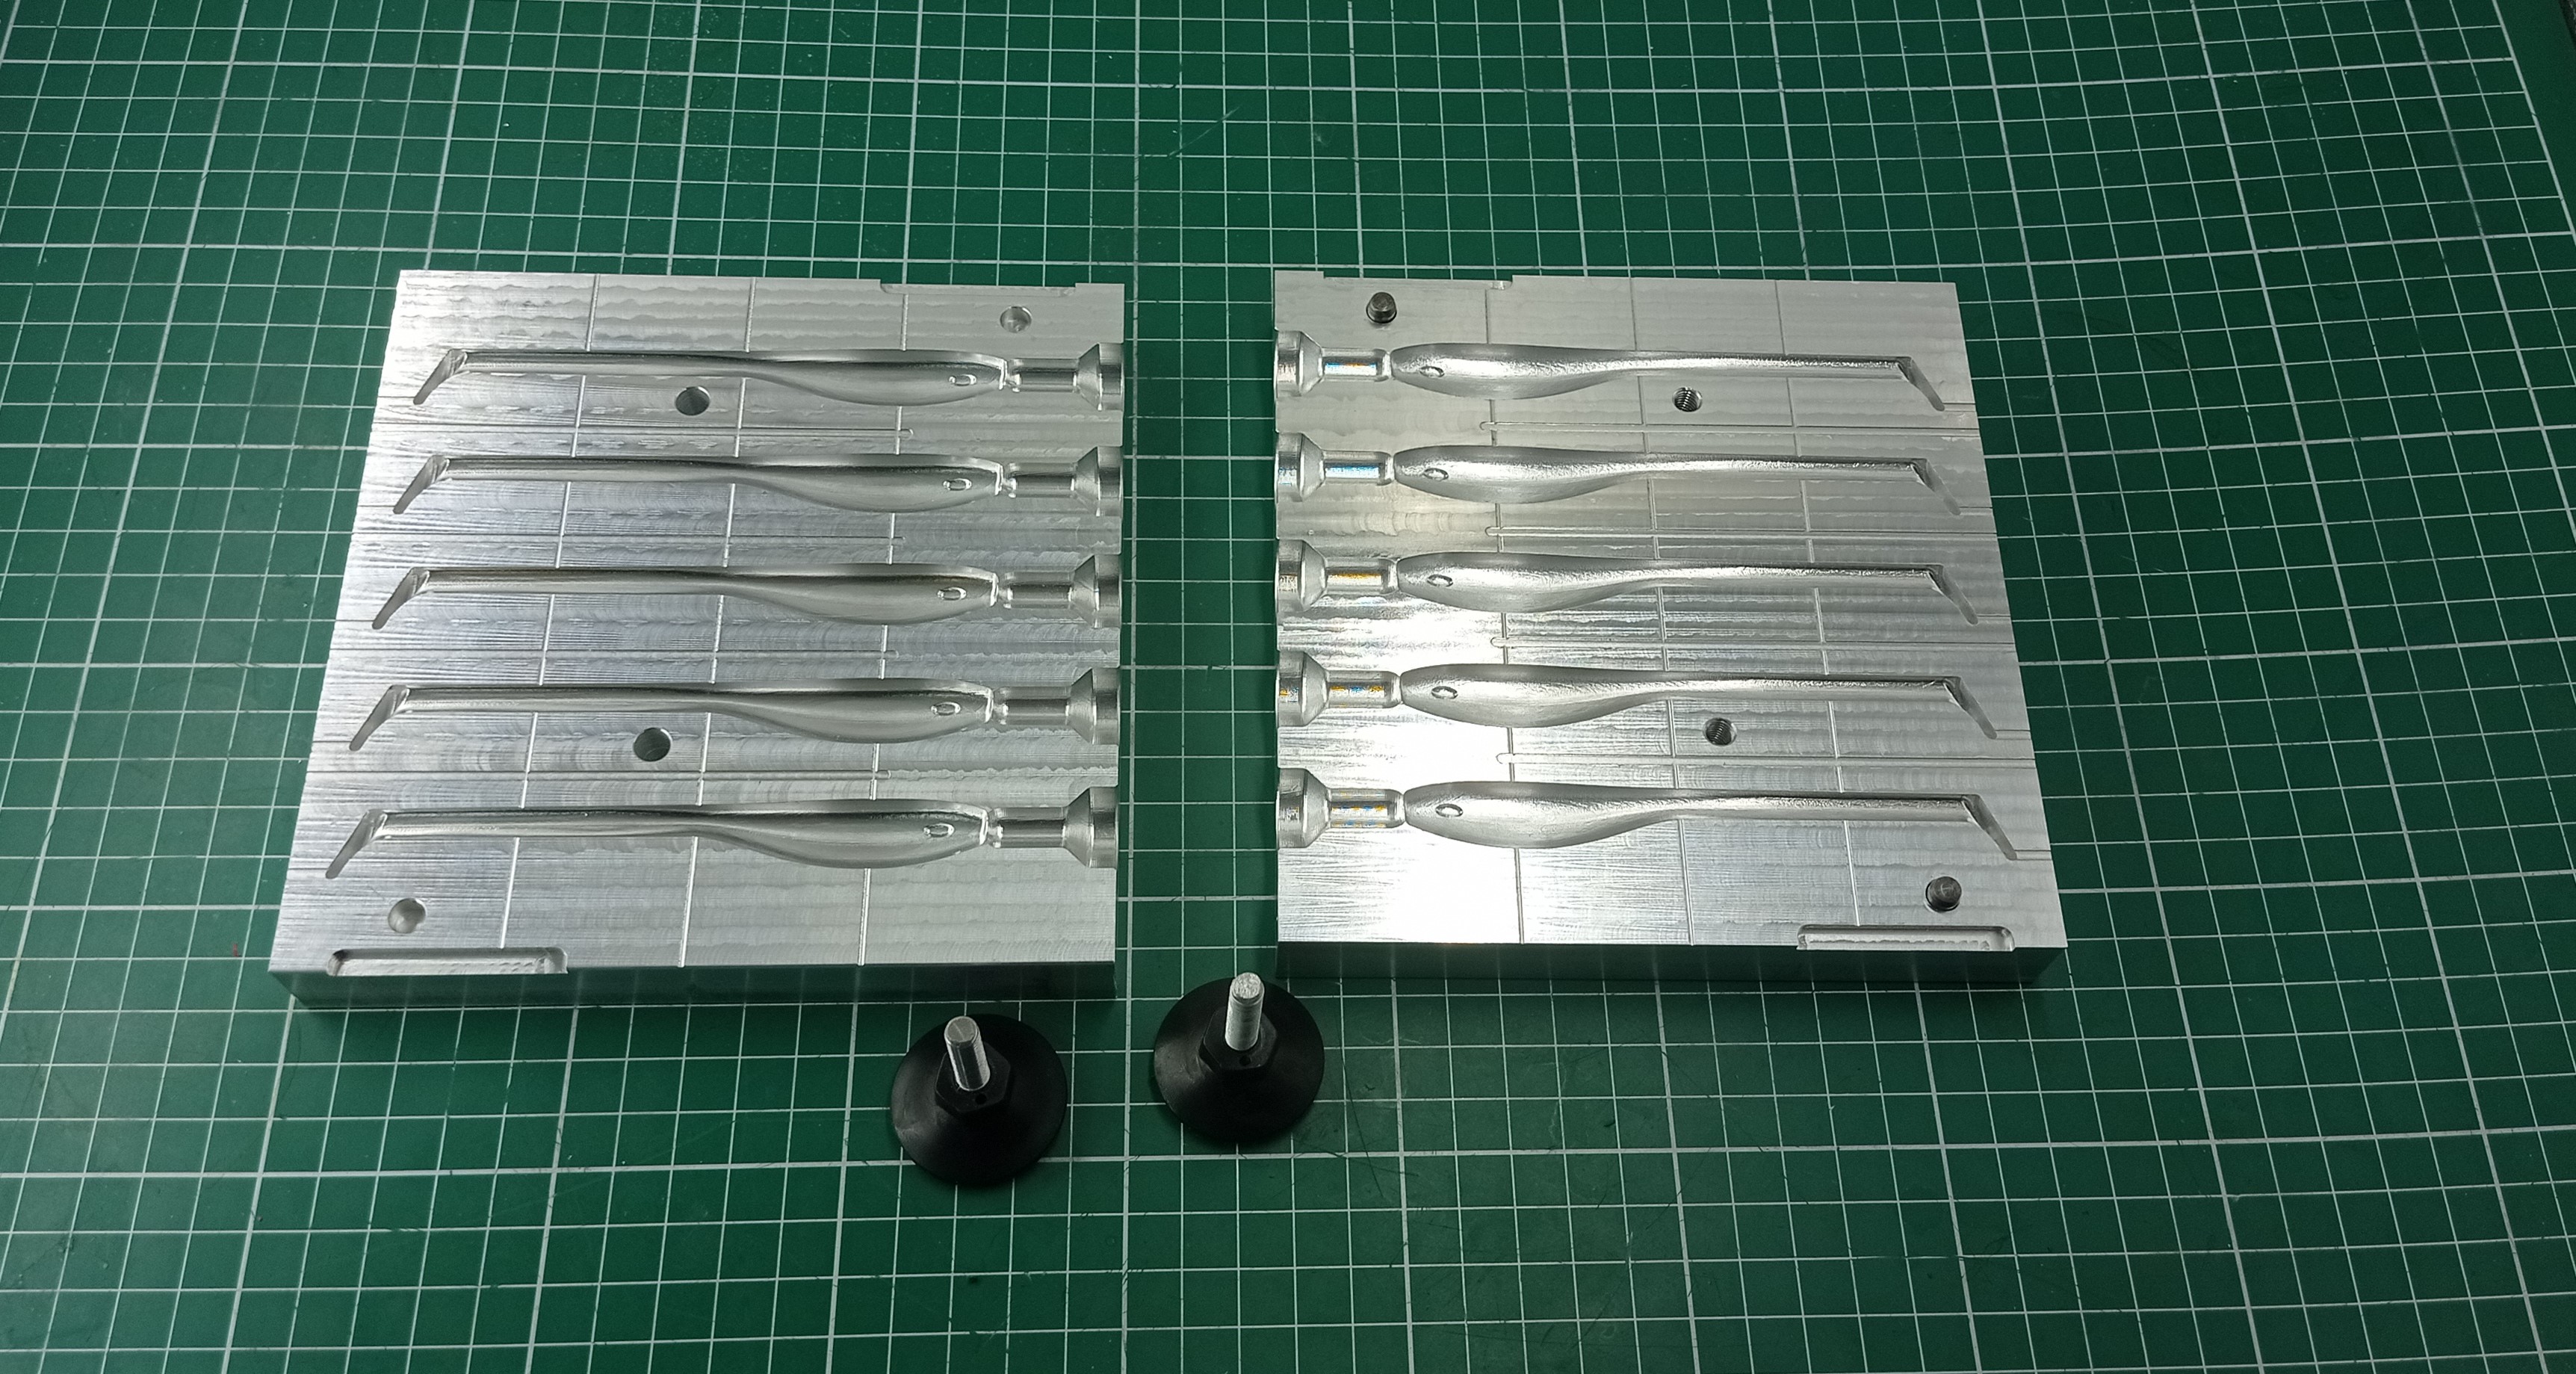 Five cavity CNC machined aluminum mold for 4.5 twitching shad